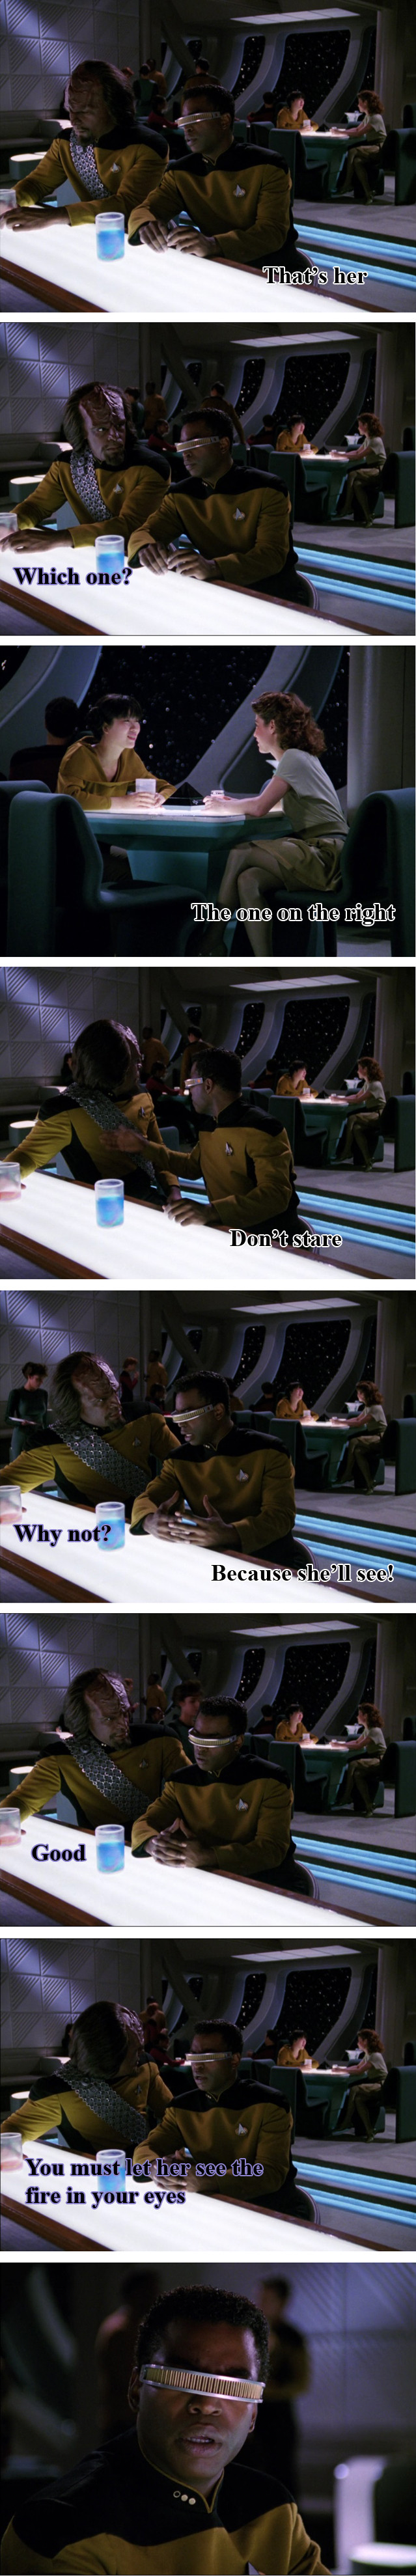 Thanks Worf. That helps a lot.